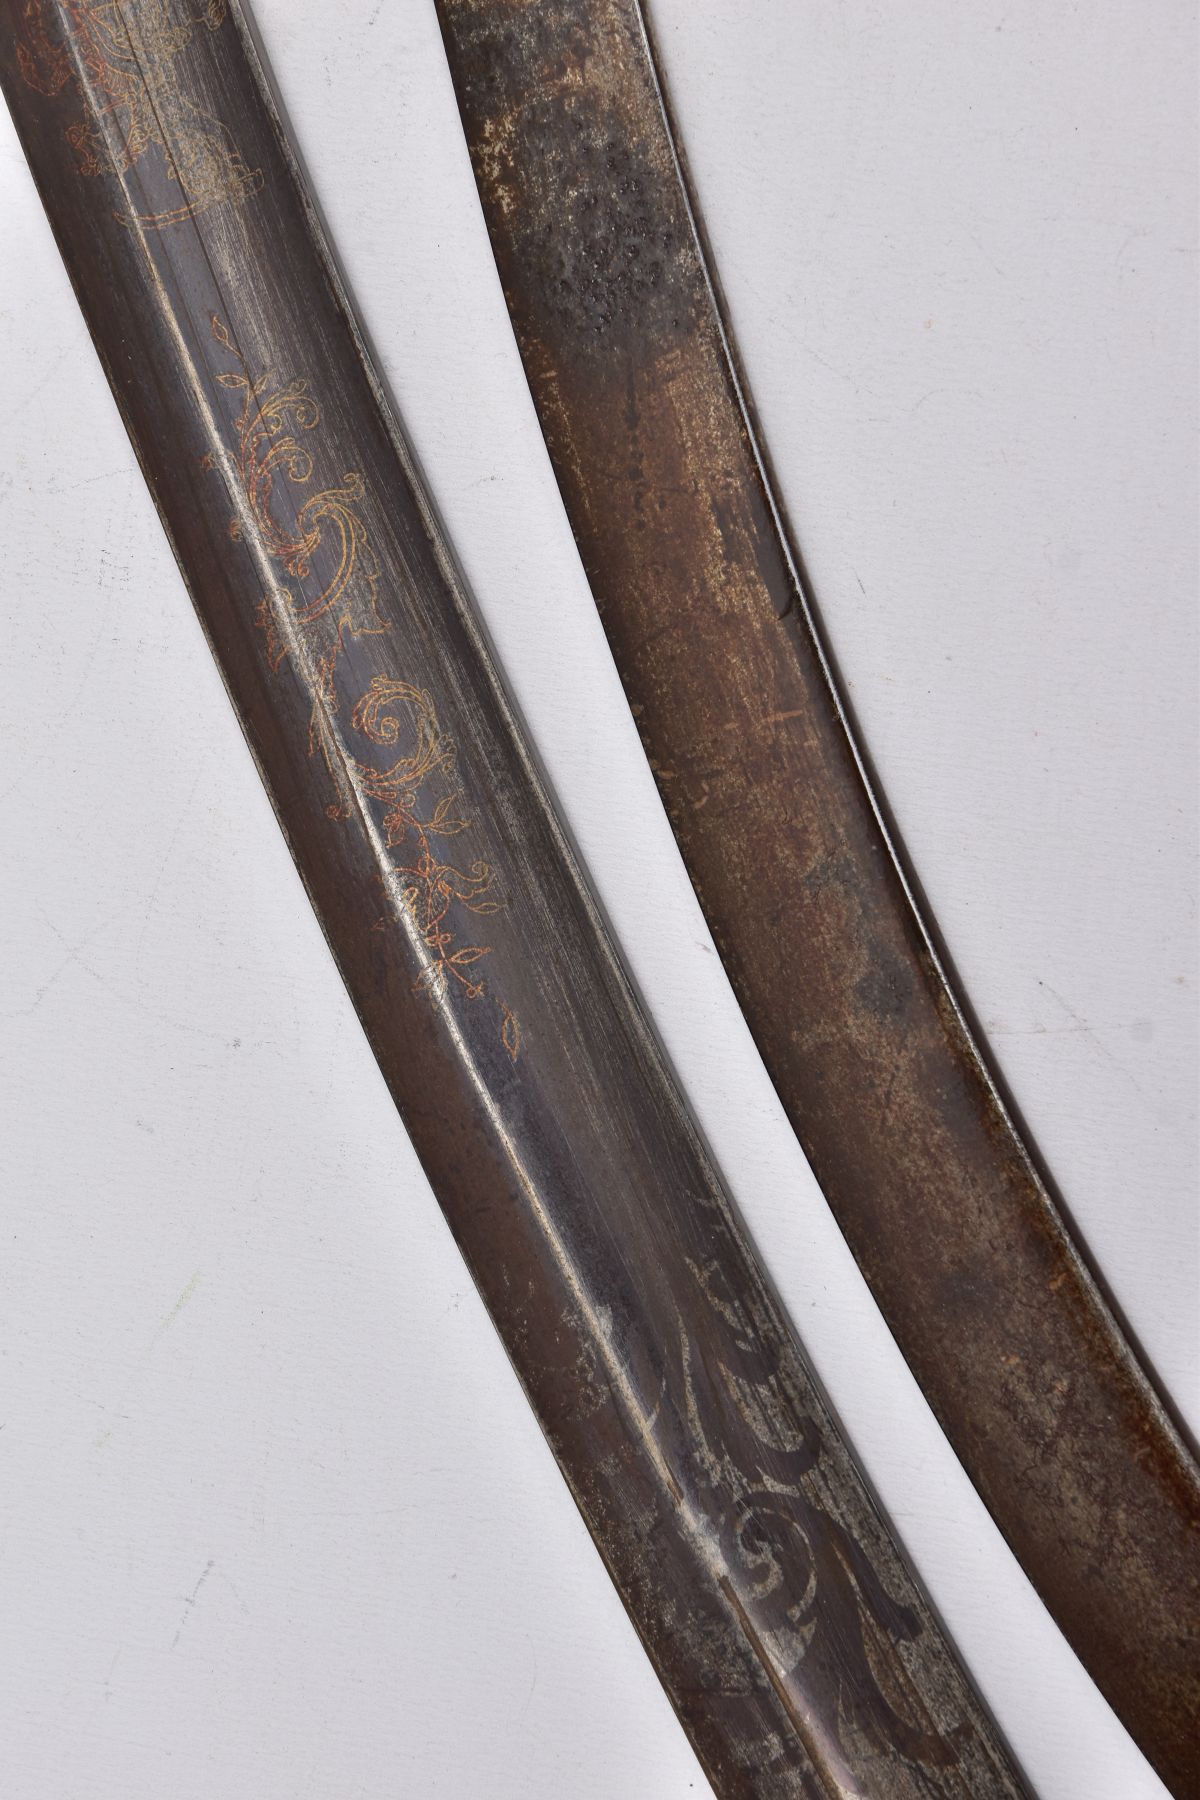 TWO LONG CURVED BLADE SWORDS, Eastern in design and looks, blade on one has been lacquered, etched - Image 10 of 10